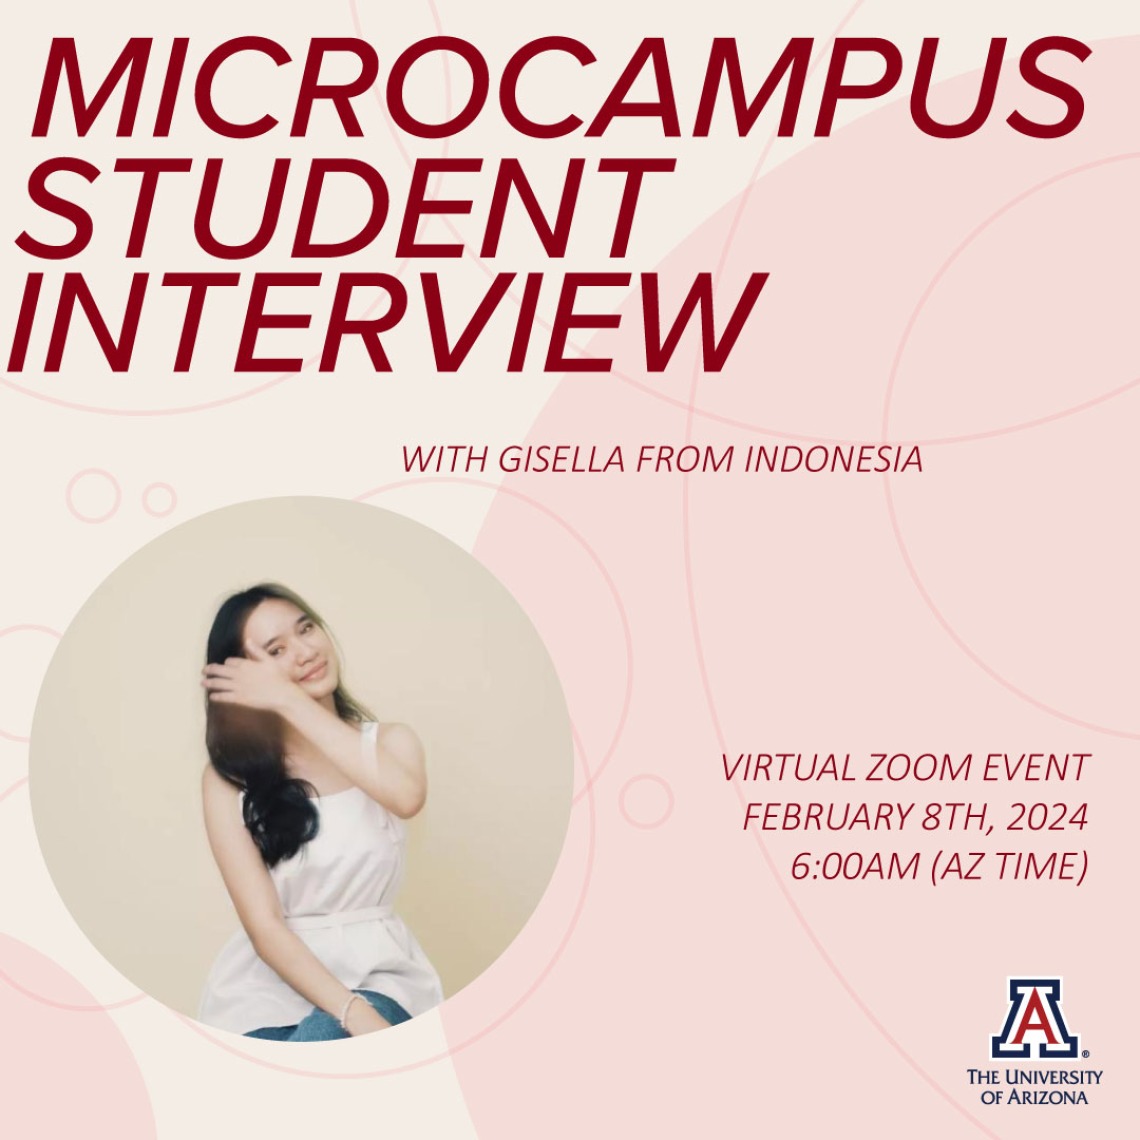 Microcampus student interview with Gisella